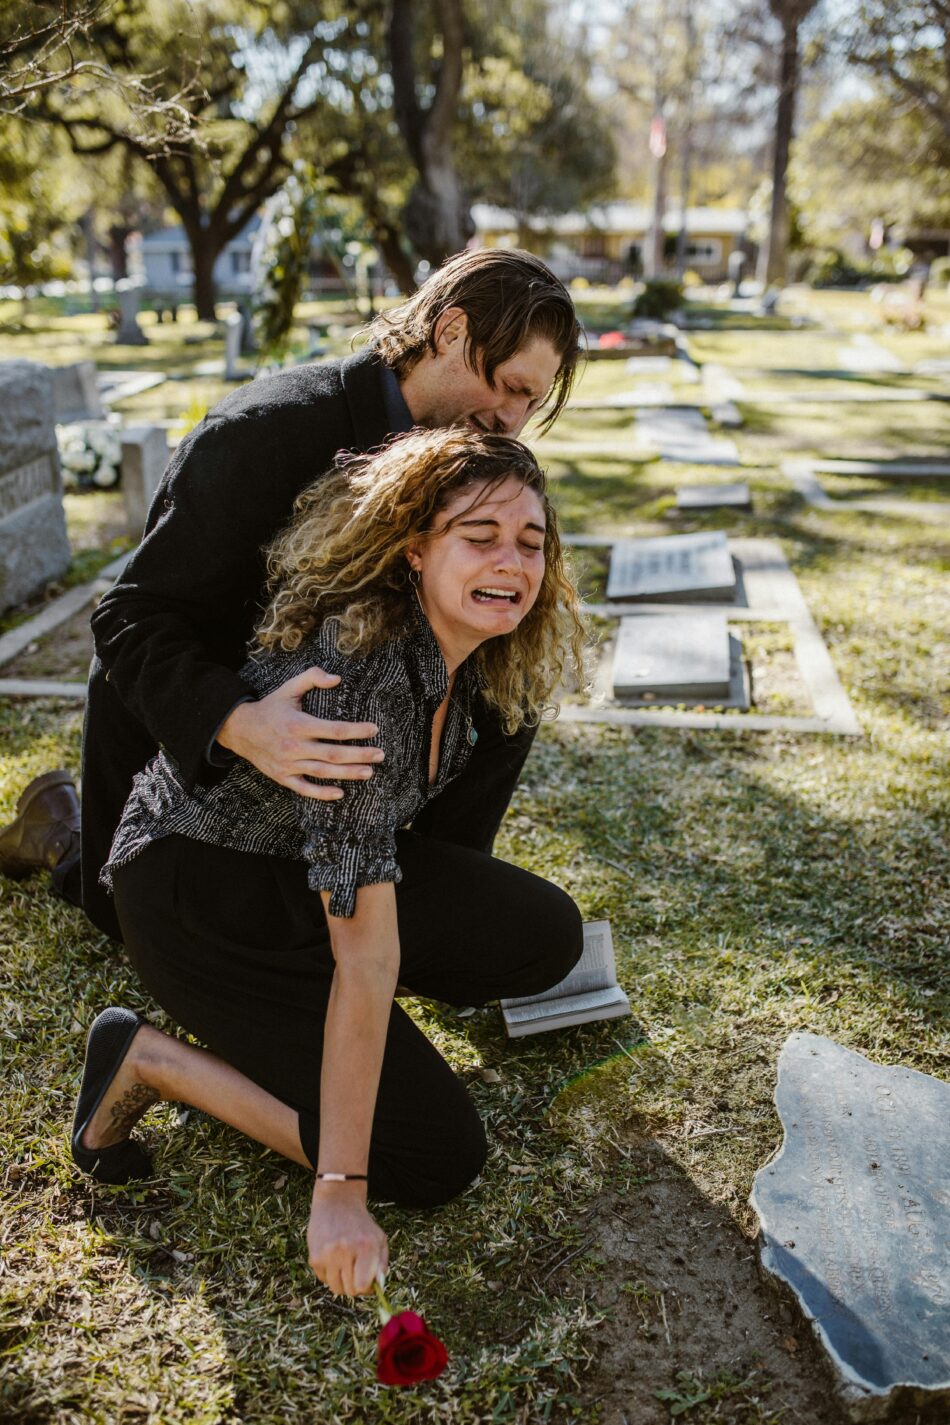 A woman crying besides a man on a cemetery